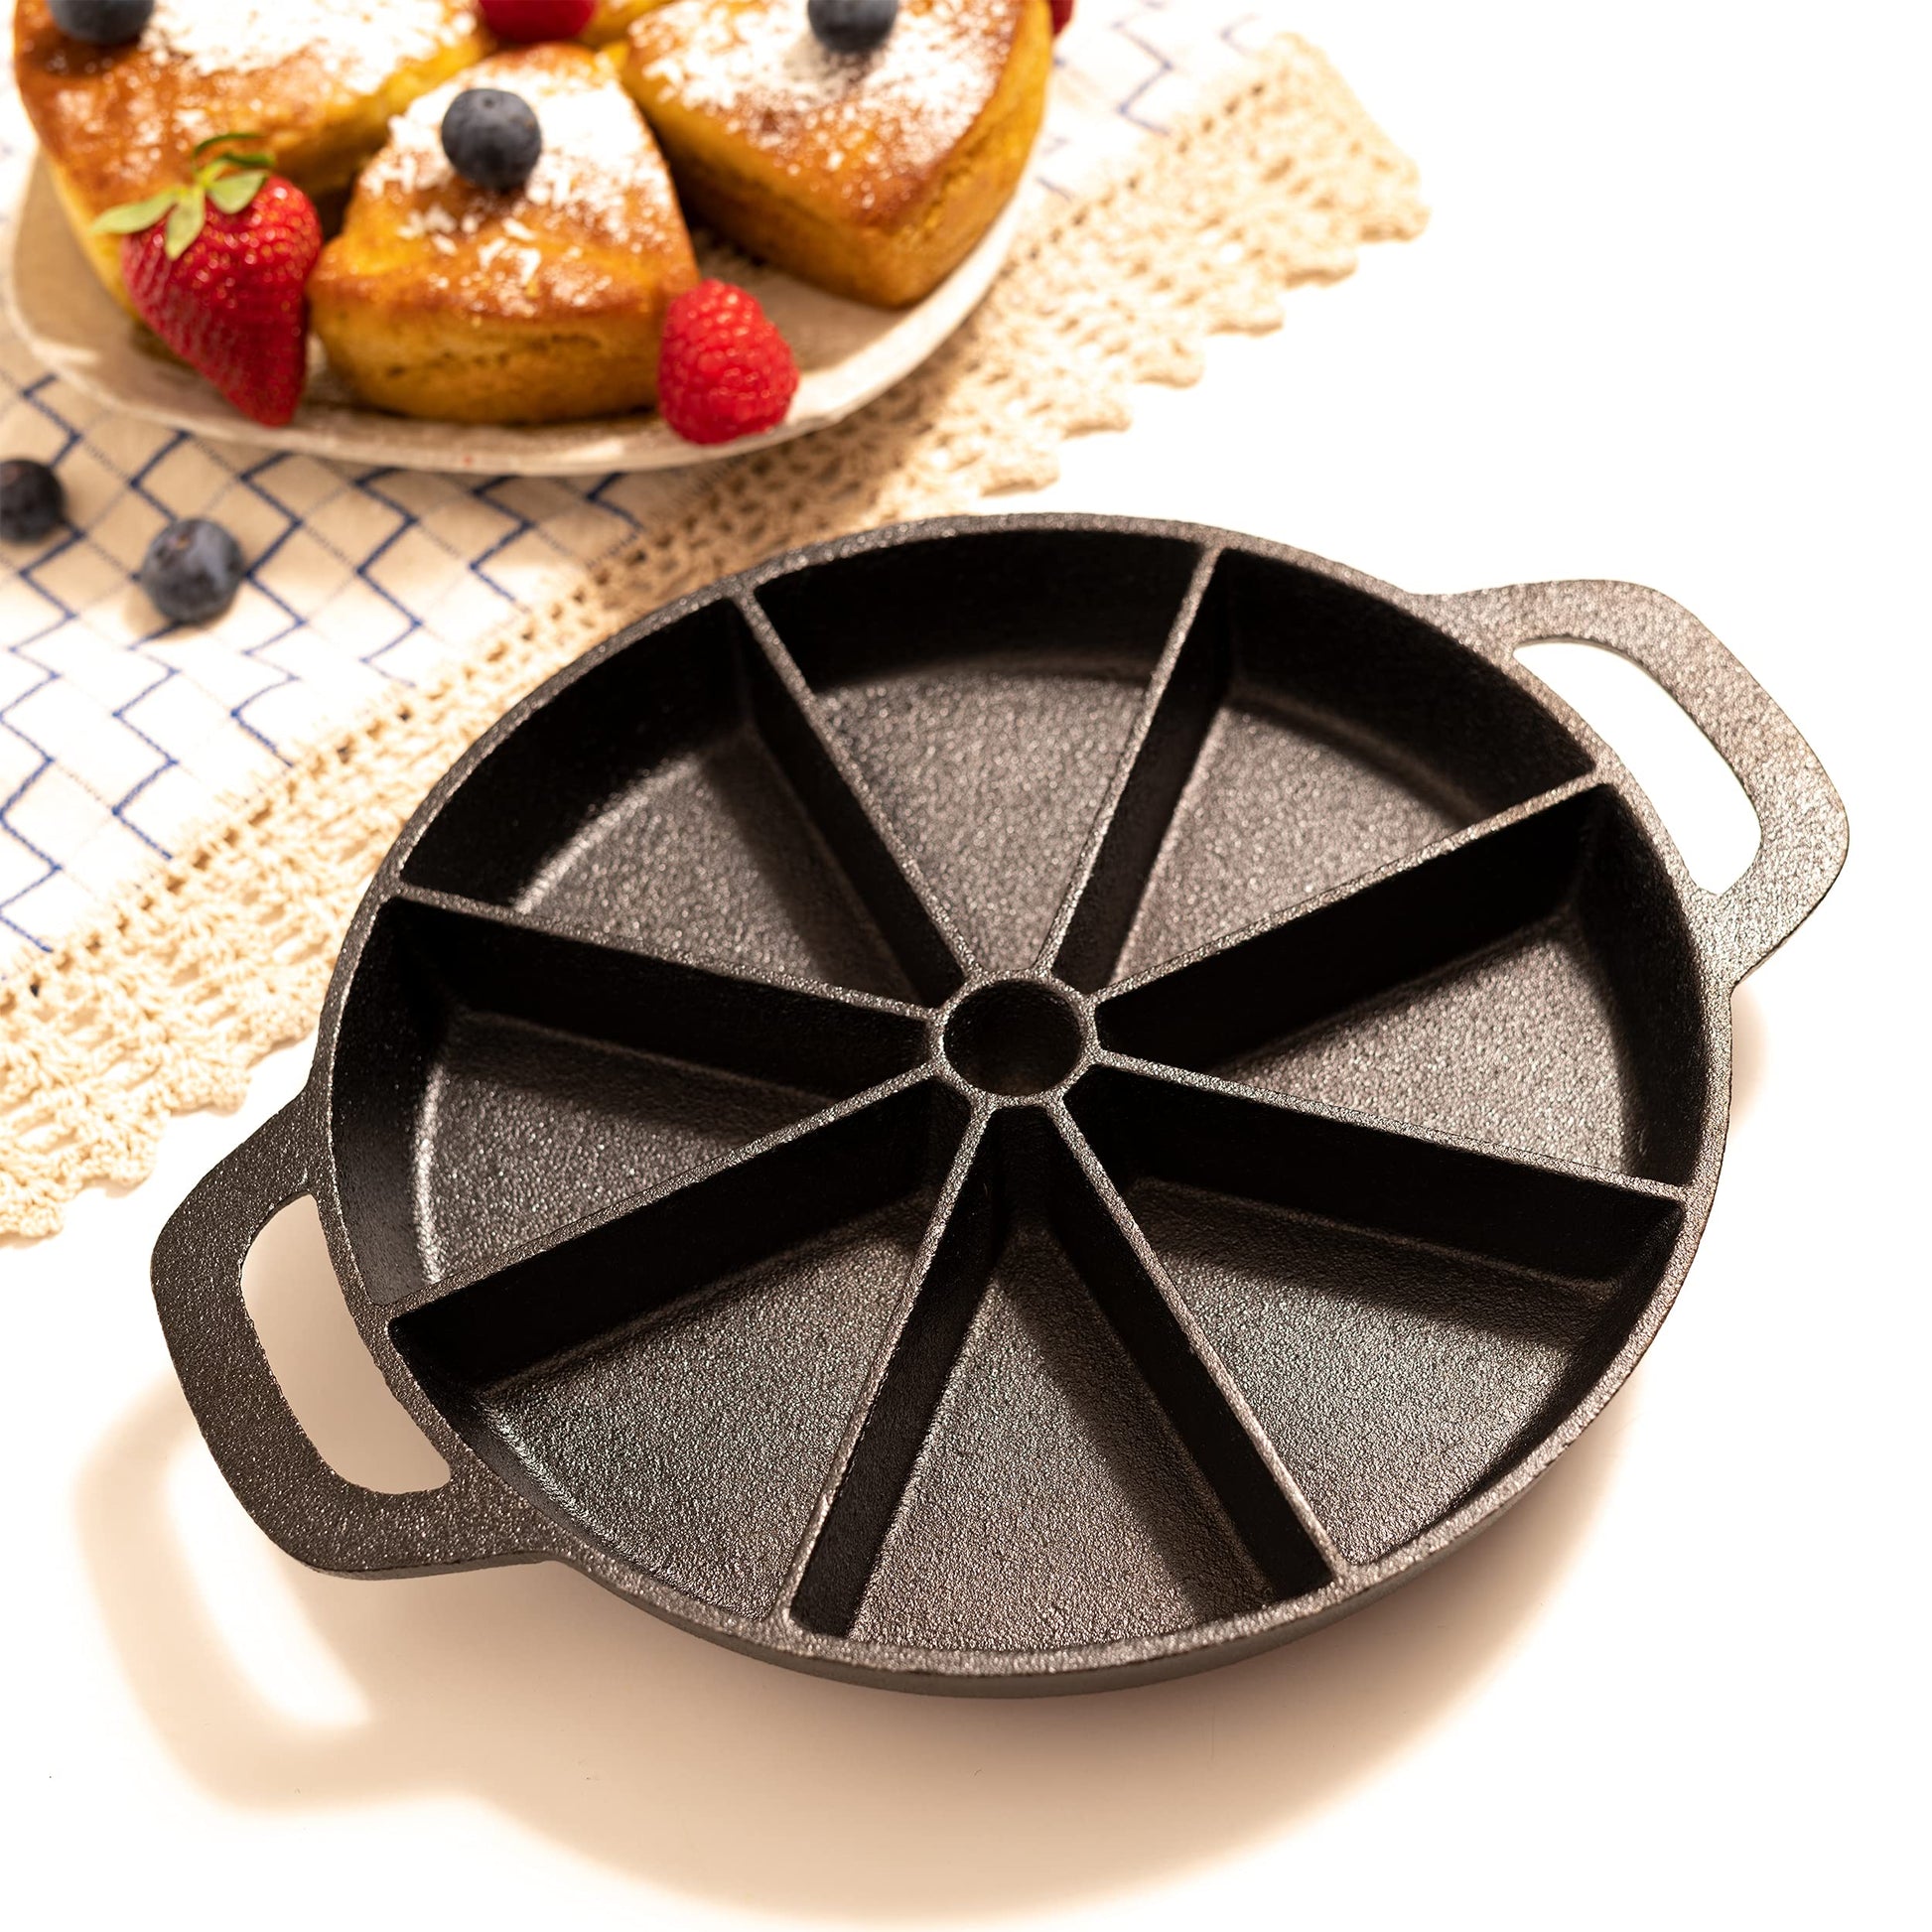 Cast Iron Scone Pan / Cornbread Pan for 8 Wedge Shaped Bakes, Pre